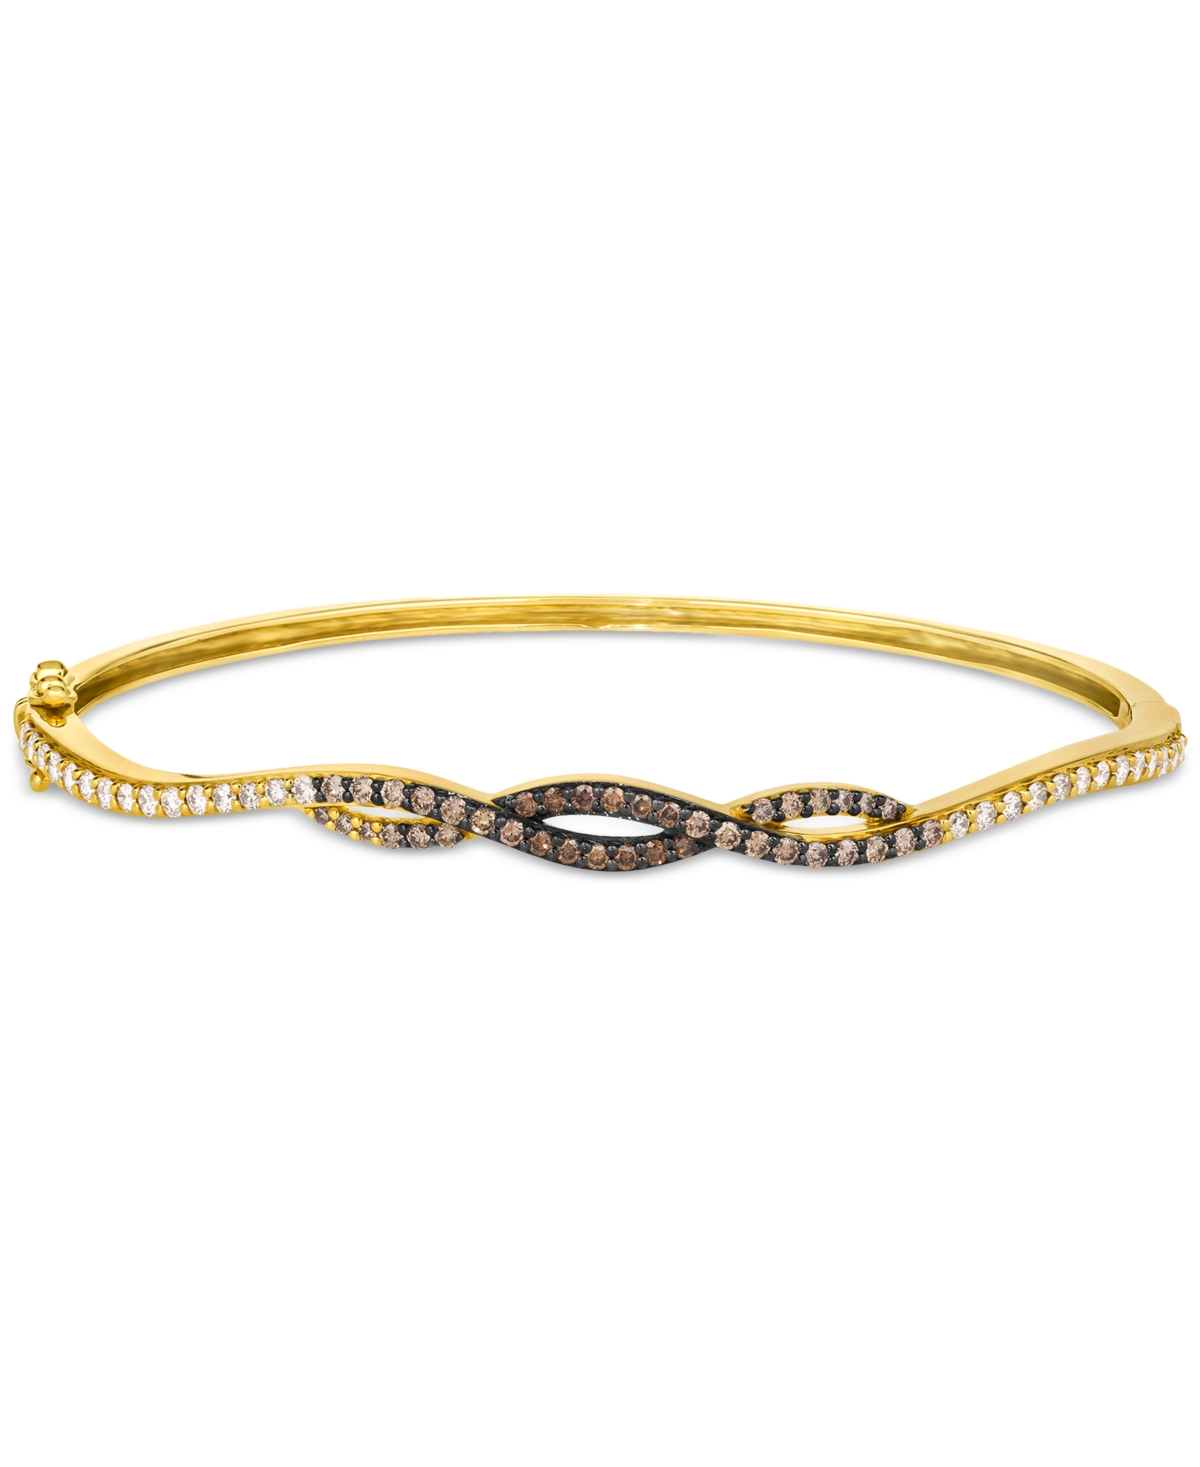 Le Vian Ombre Chocolate Ombre Diamond Crossover Bangle Bracelet (1 Ct. T.w.) In 14k Gold In K Honey Gold Bangle